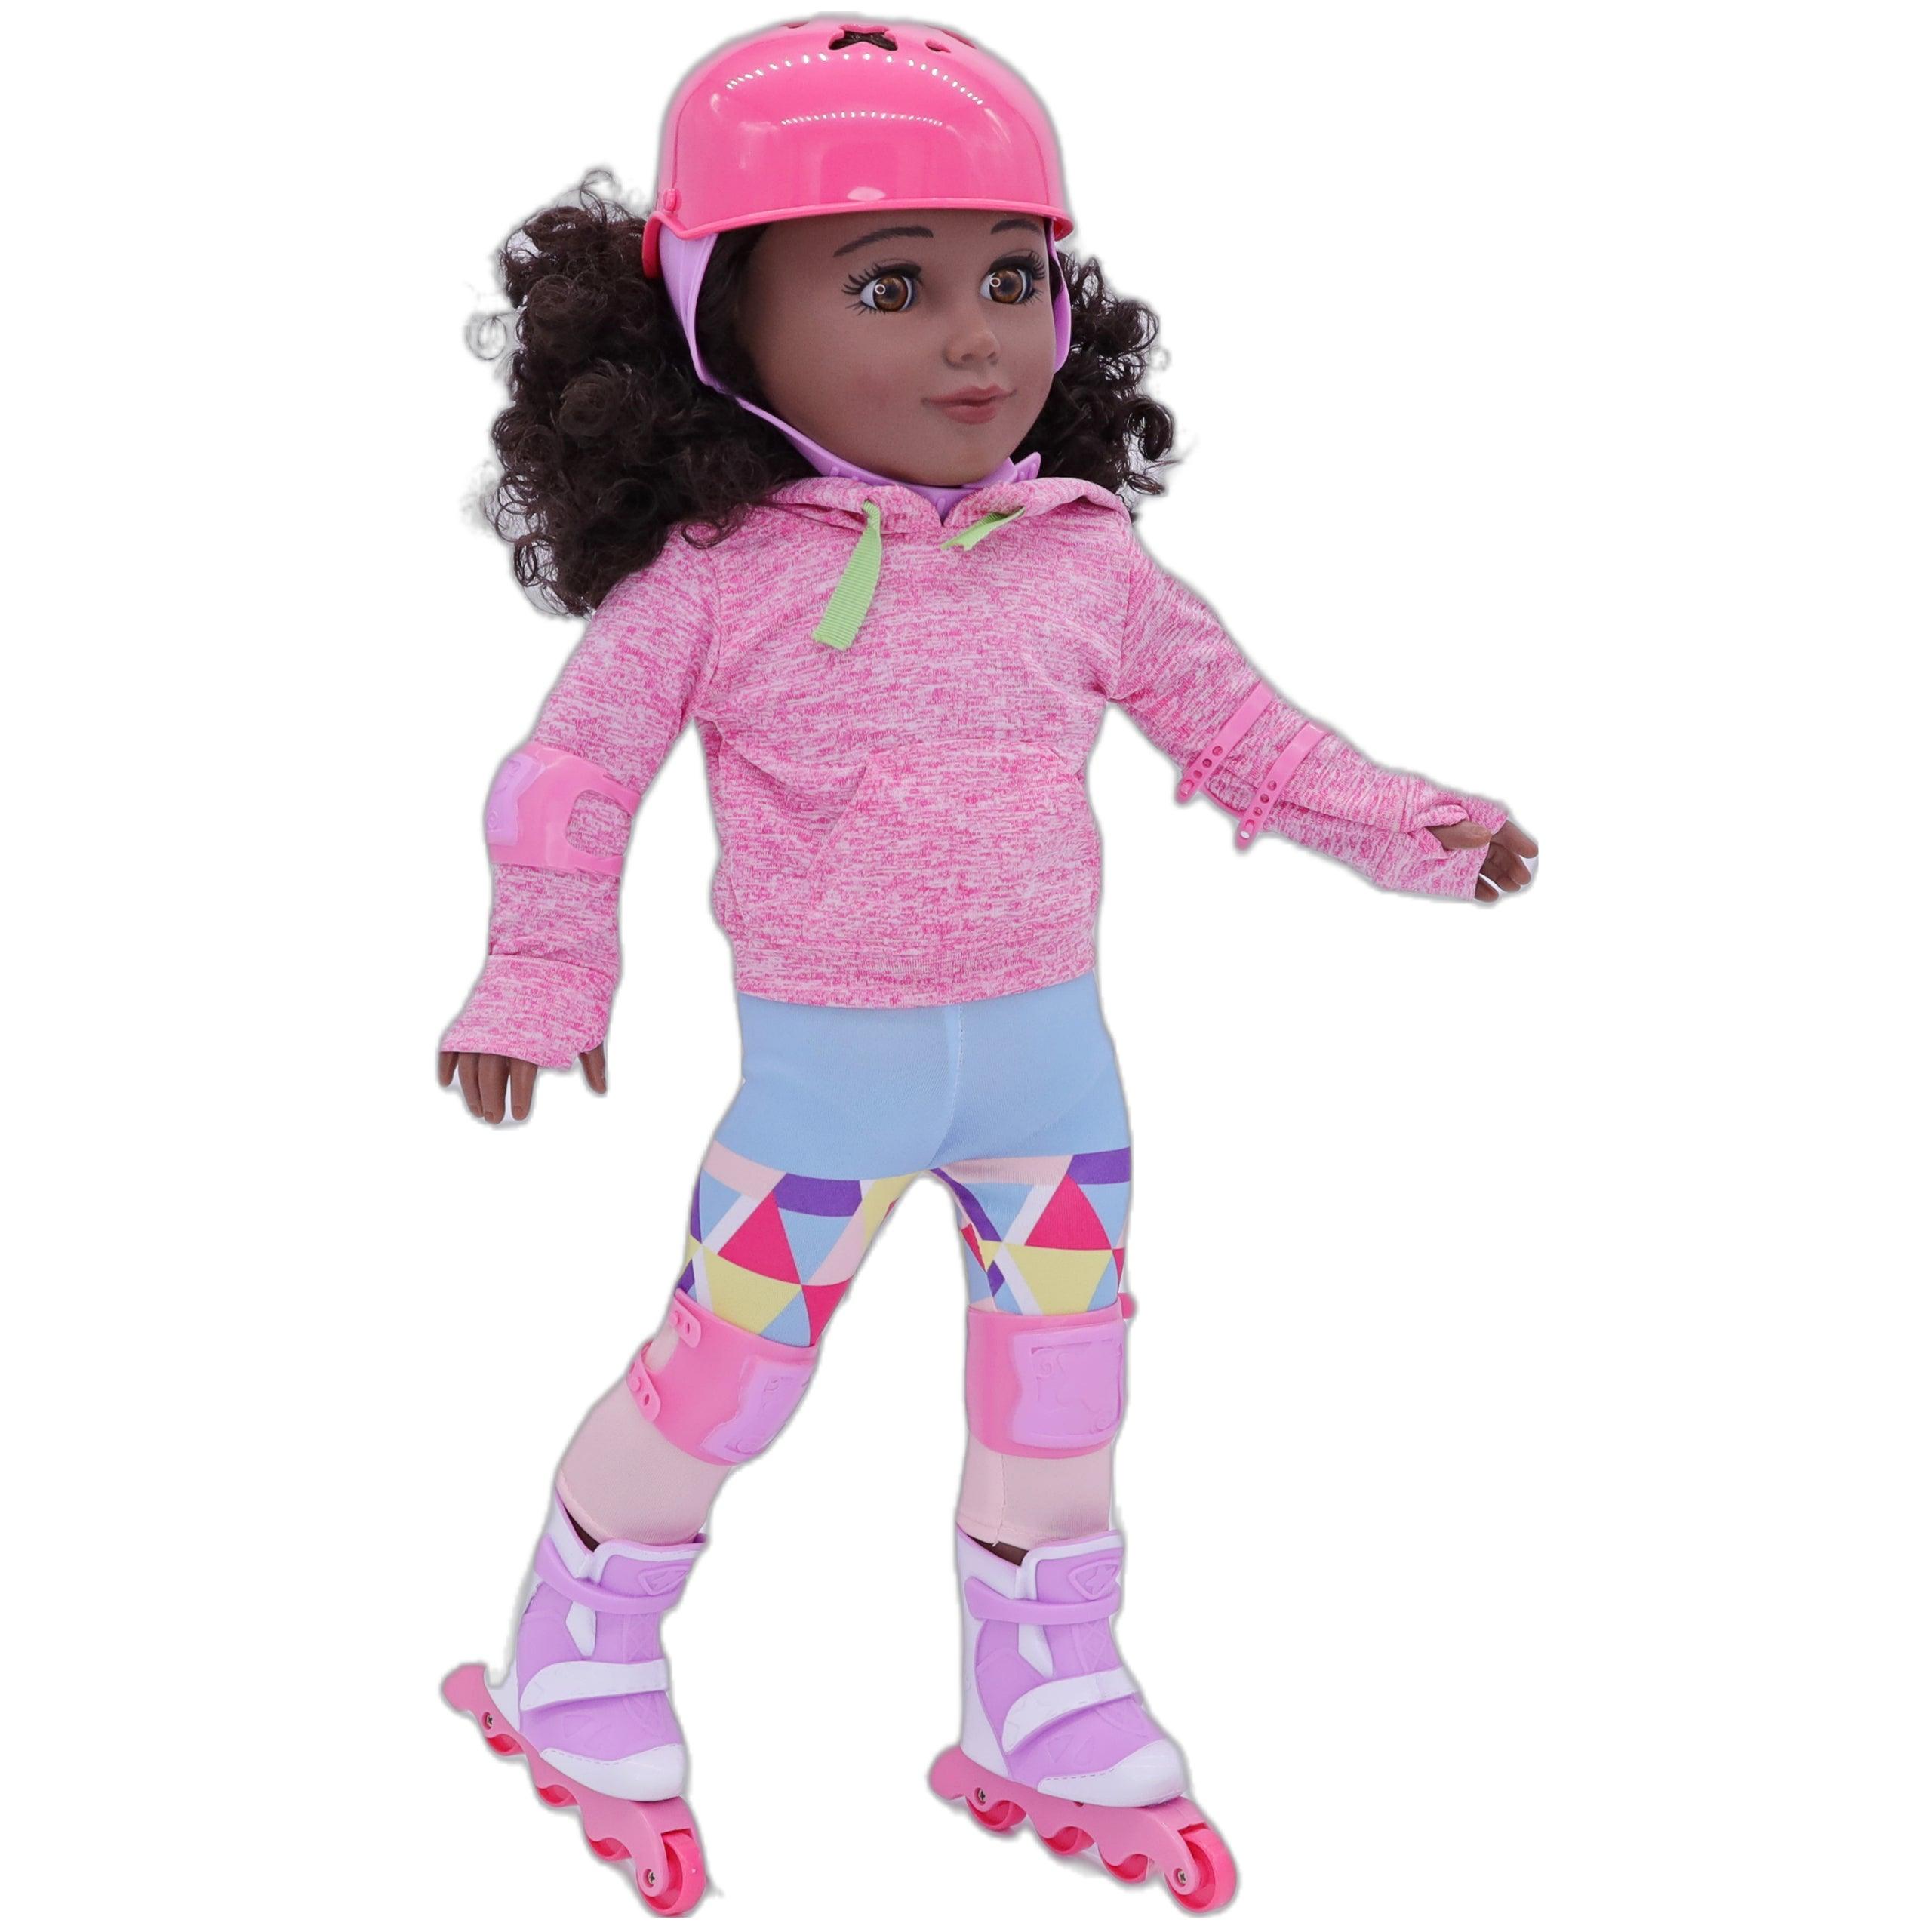 Playtime by Eimmie Playtime Pack Roller Skating 18 Inch Dolls - OrangeOnions Wholesale